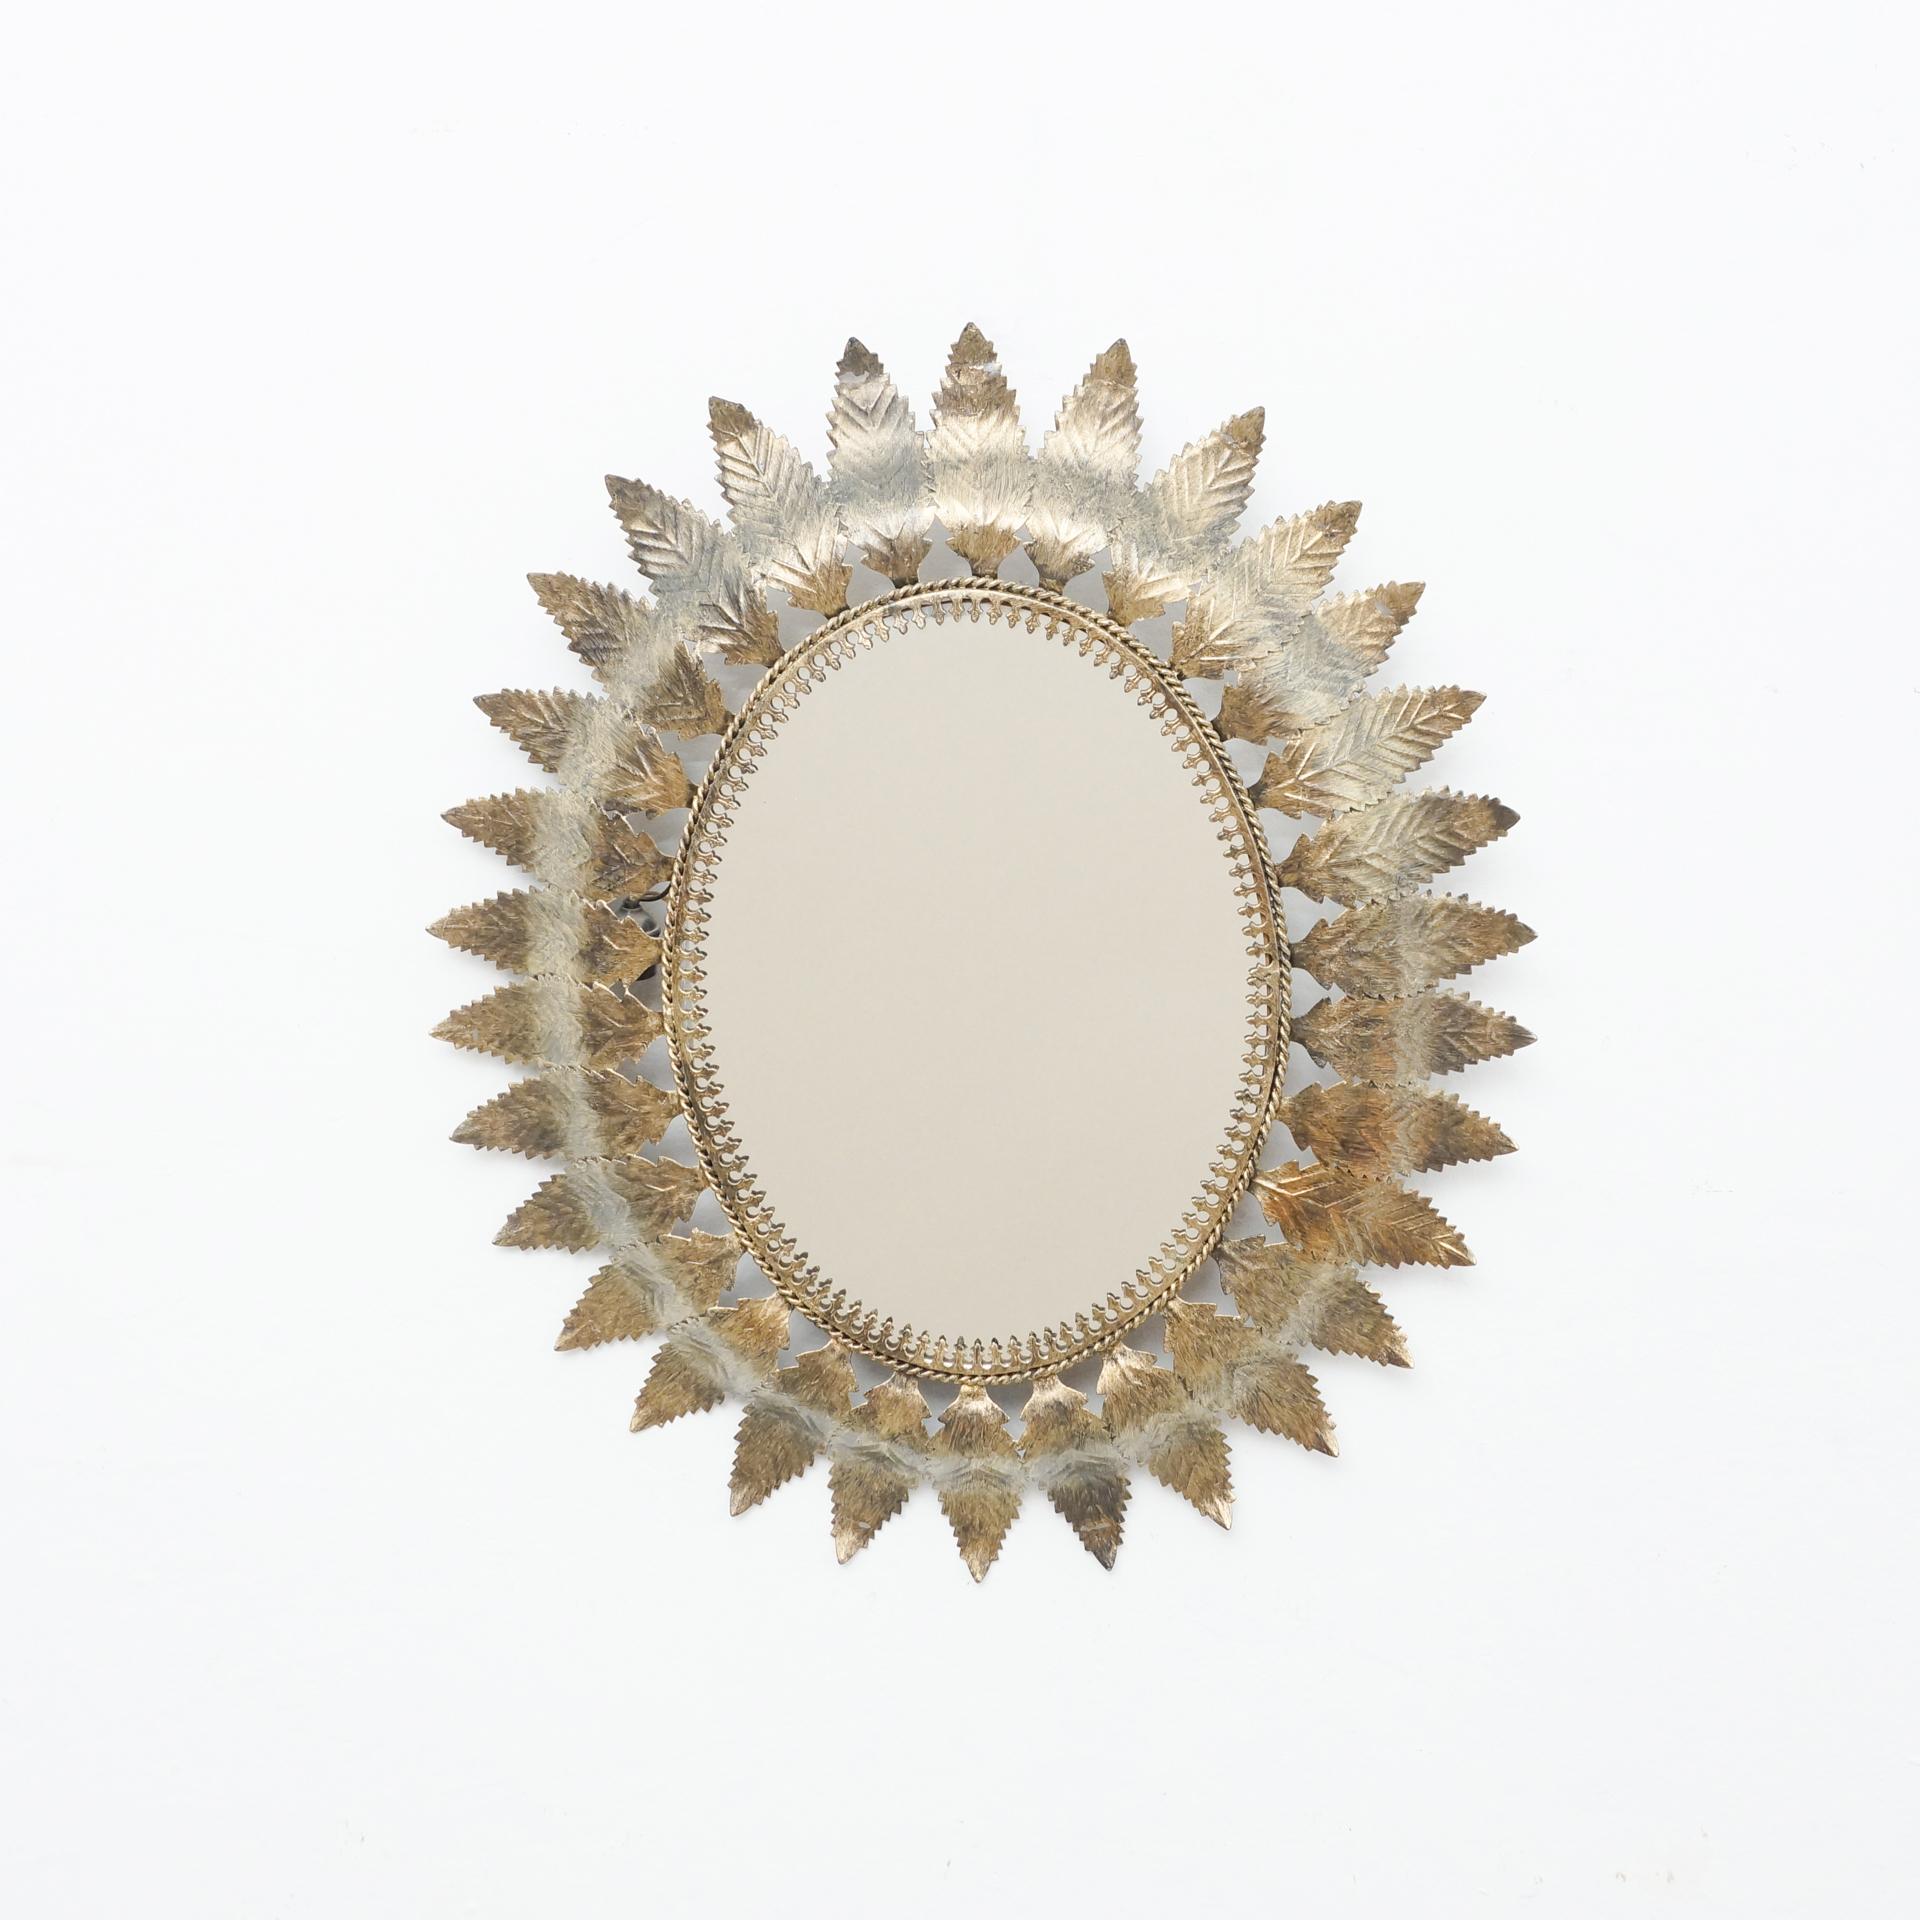 Mid-Century Modern sunburst mirror brass, circa 1960
Traditionally manufactured in France.
By unknown designer.

In original condition with minor wear consistent of age and use, preserving a beautiful patina.

 